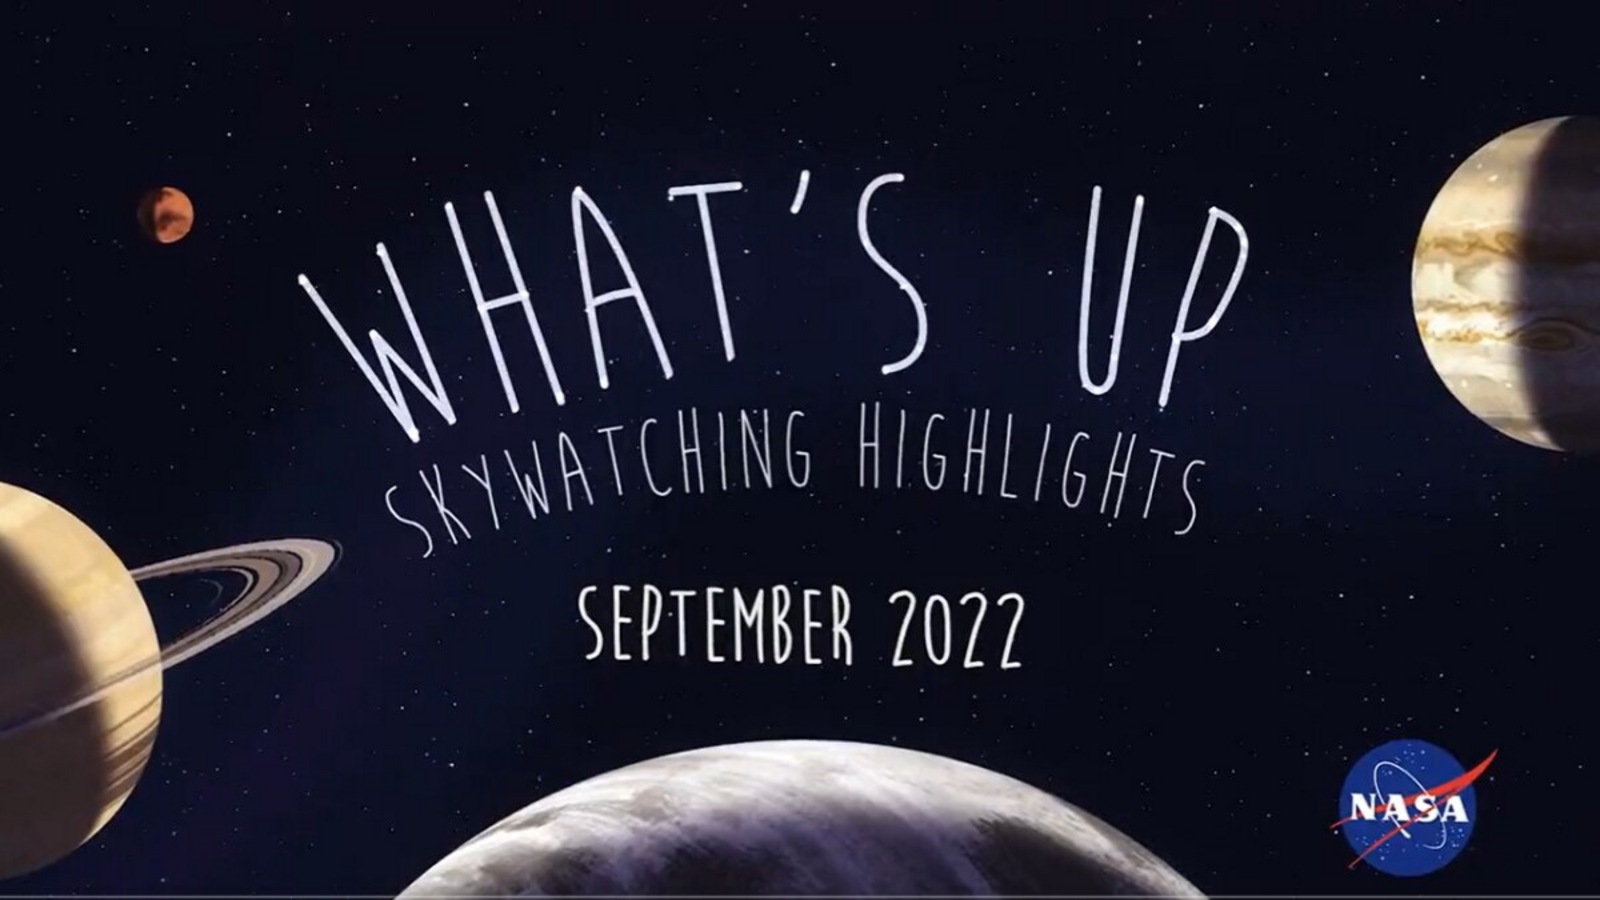 What's in the sky for September? NASA reveals special events